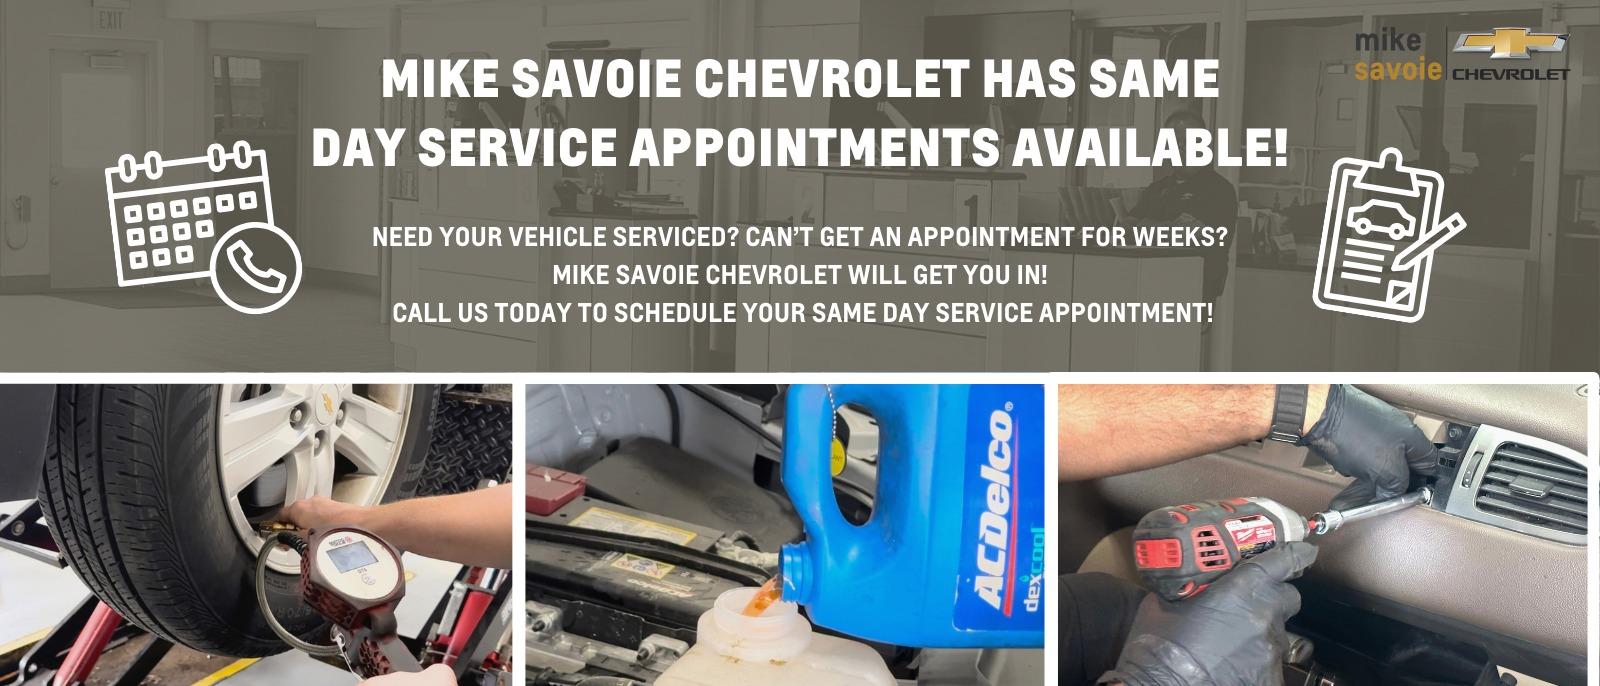 Need Service? Can’t Get an Appointment For Weeks?
Mike Savoie Chevrolet Will Get You In! Same Day Service
Appointments Available at Mike Savoie Chevrolet –
Give Us a Call Today!